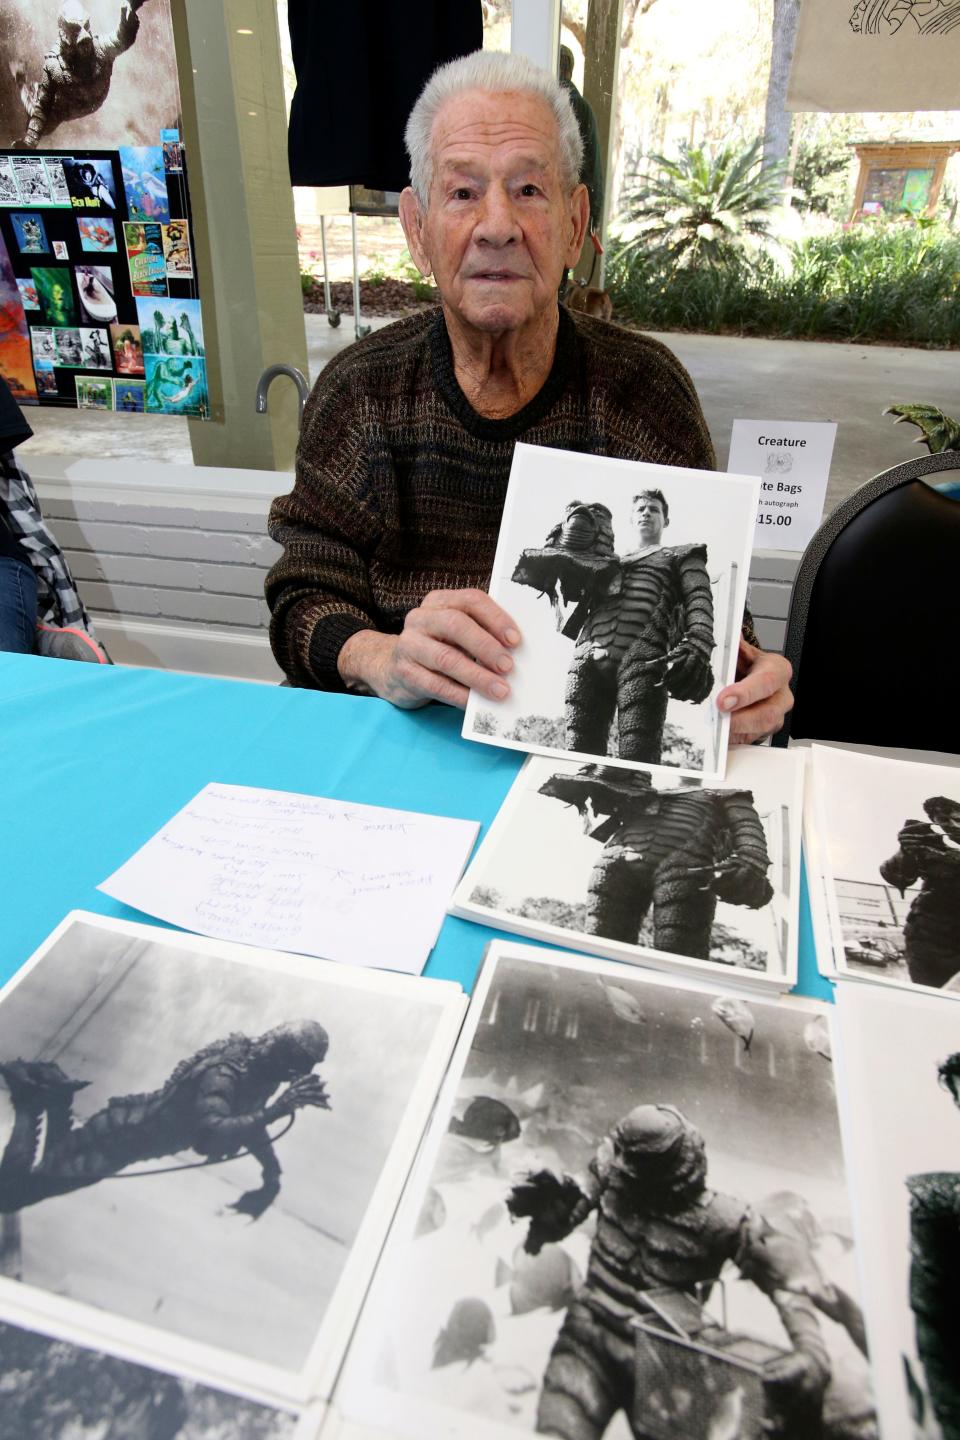 Ricou Browning, who played the creature in "Creature from the Black Lagoon," poses for photos for people during Florida SpringsFest at Silver Springs State Park in Silver Springs, Fla., Sunday, March 4, 2018. Browning, best known for playing the Gill Man in the 1954 monster movie “Creature from the Black Lagoon,” has died. His family told news outlets Browning died Feb. 27, 2023, at his home in Southwest Ranches, Fla. He was 93.